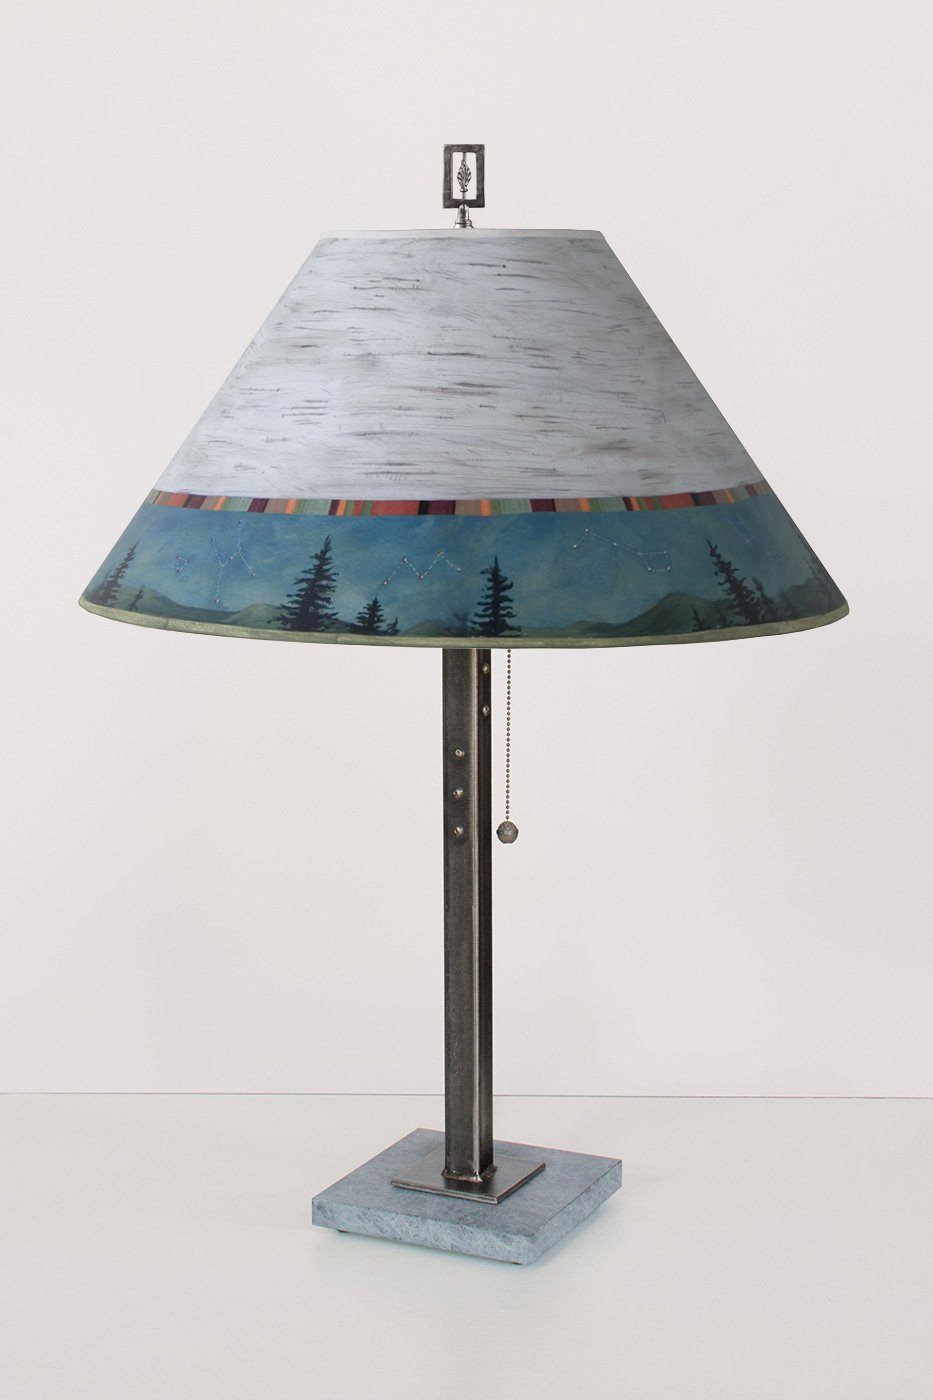 Steel Table Lamp with Large Conical Shade in Birch Midnight